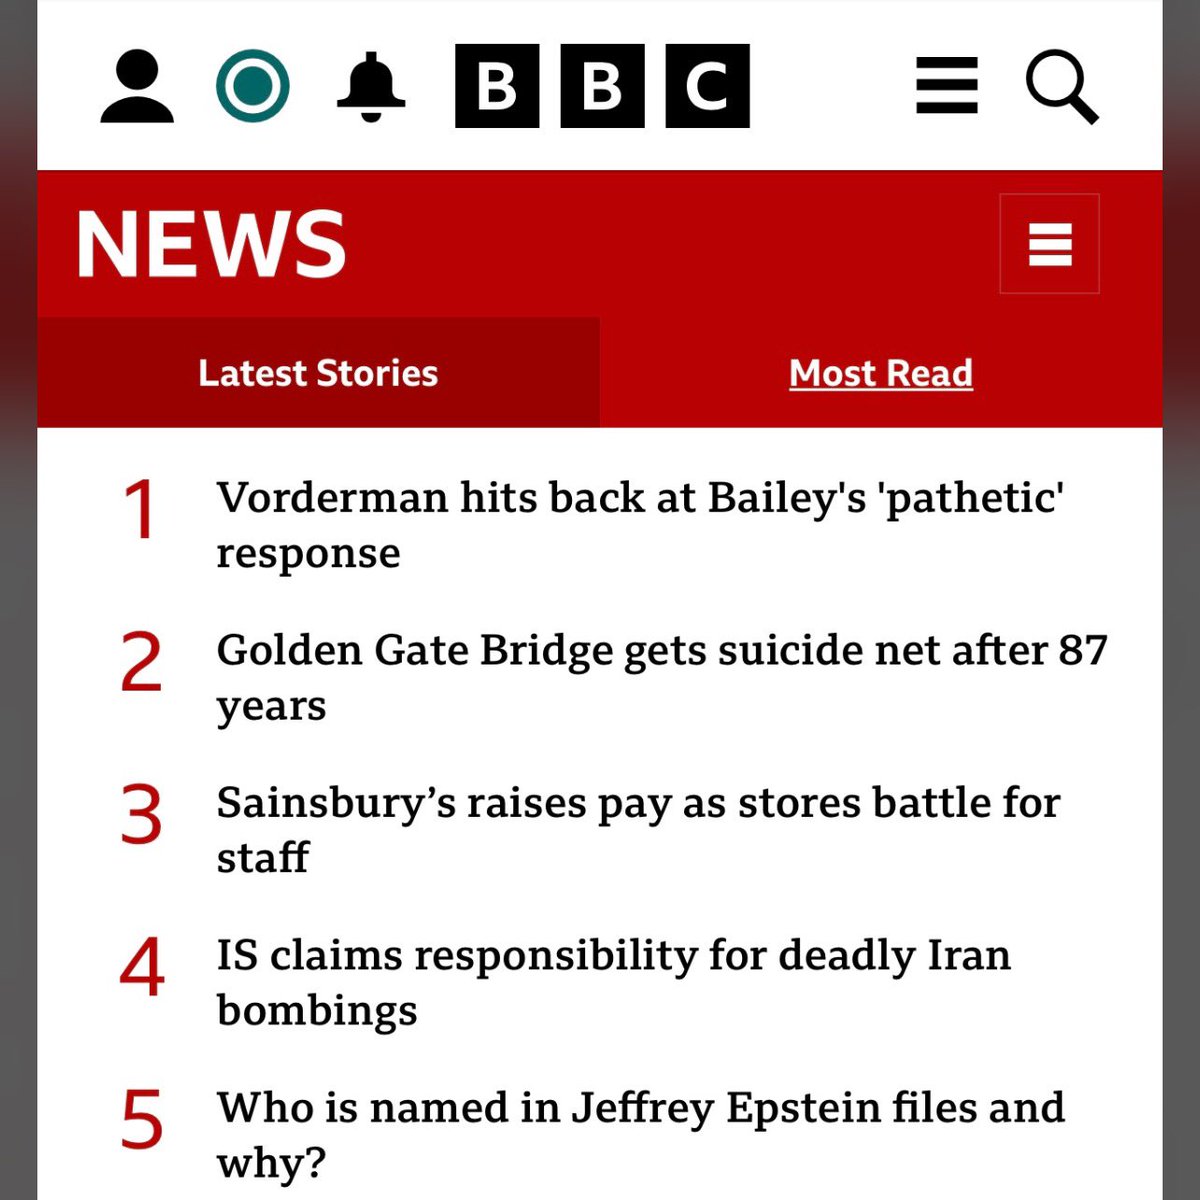 BBC NEWS 

This story about #SexistShaun 
Lord Shaun 'Bum & Boobs' Bailey has gone straight to the top of the BBC News Most Read chart.

Why?

Because we, all of us, have had enough of the far right bullies and misogyny and abuse.

We've found our voices & we are NOT giving in ❤️